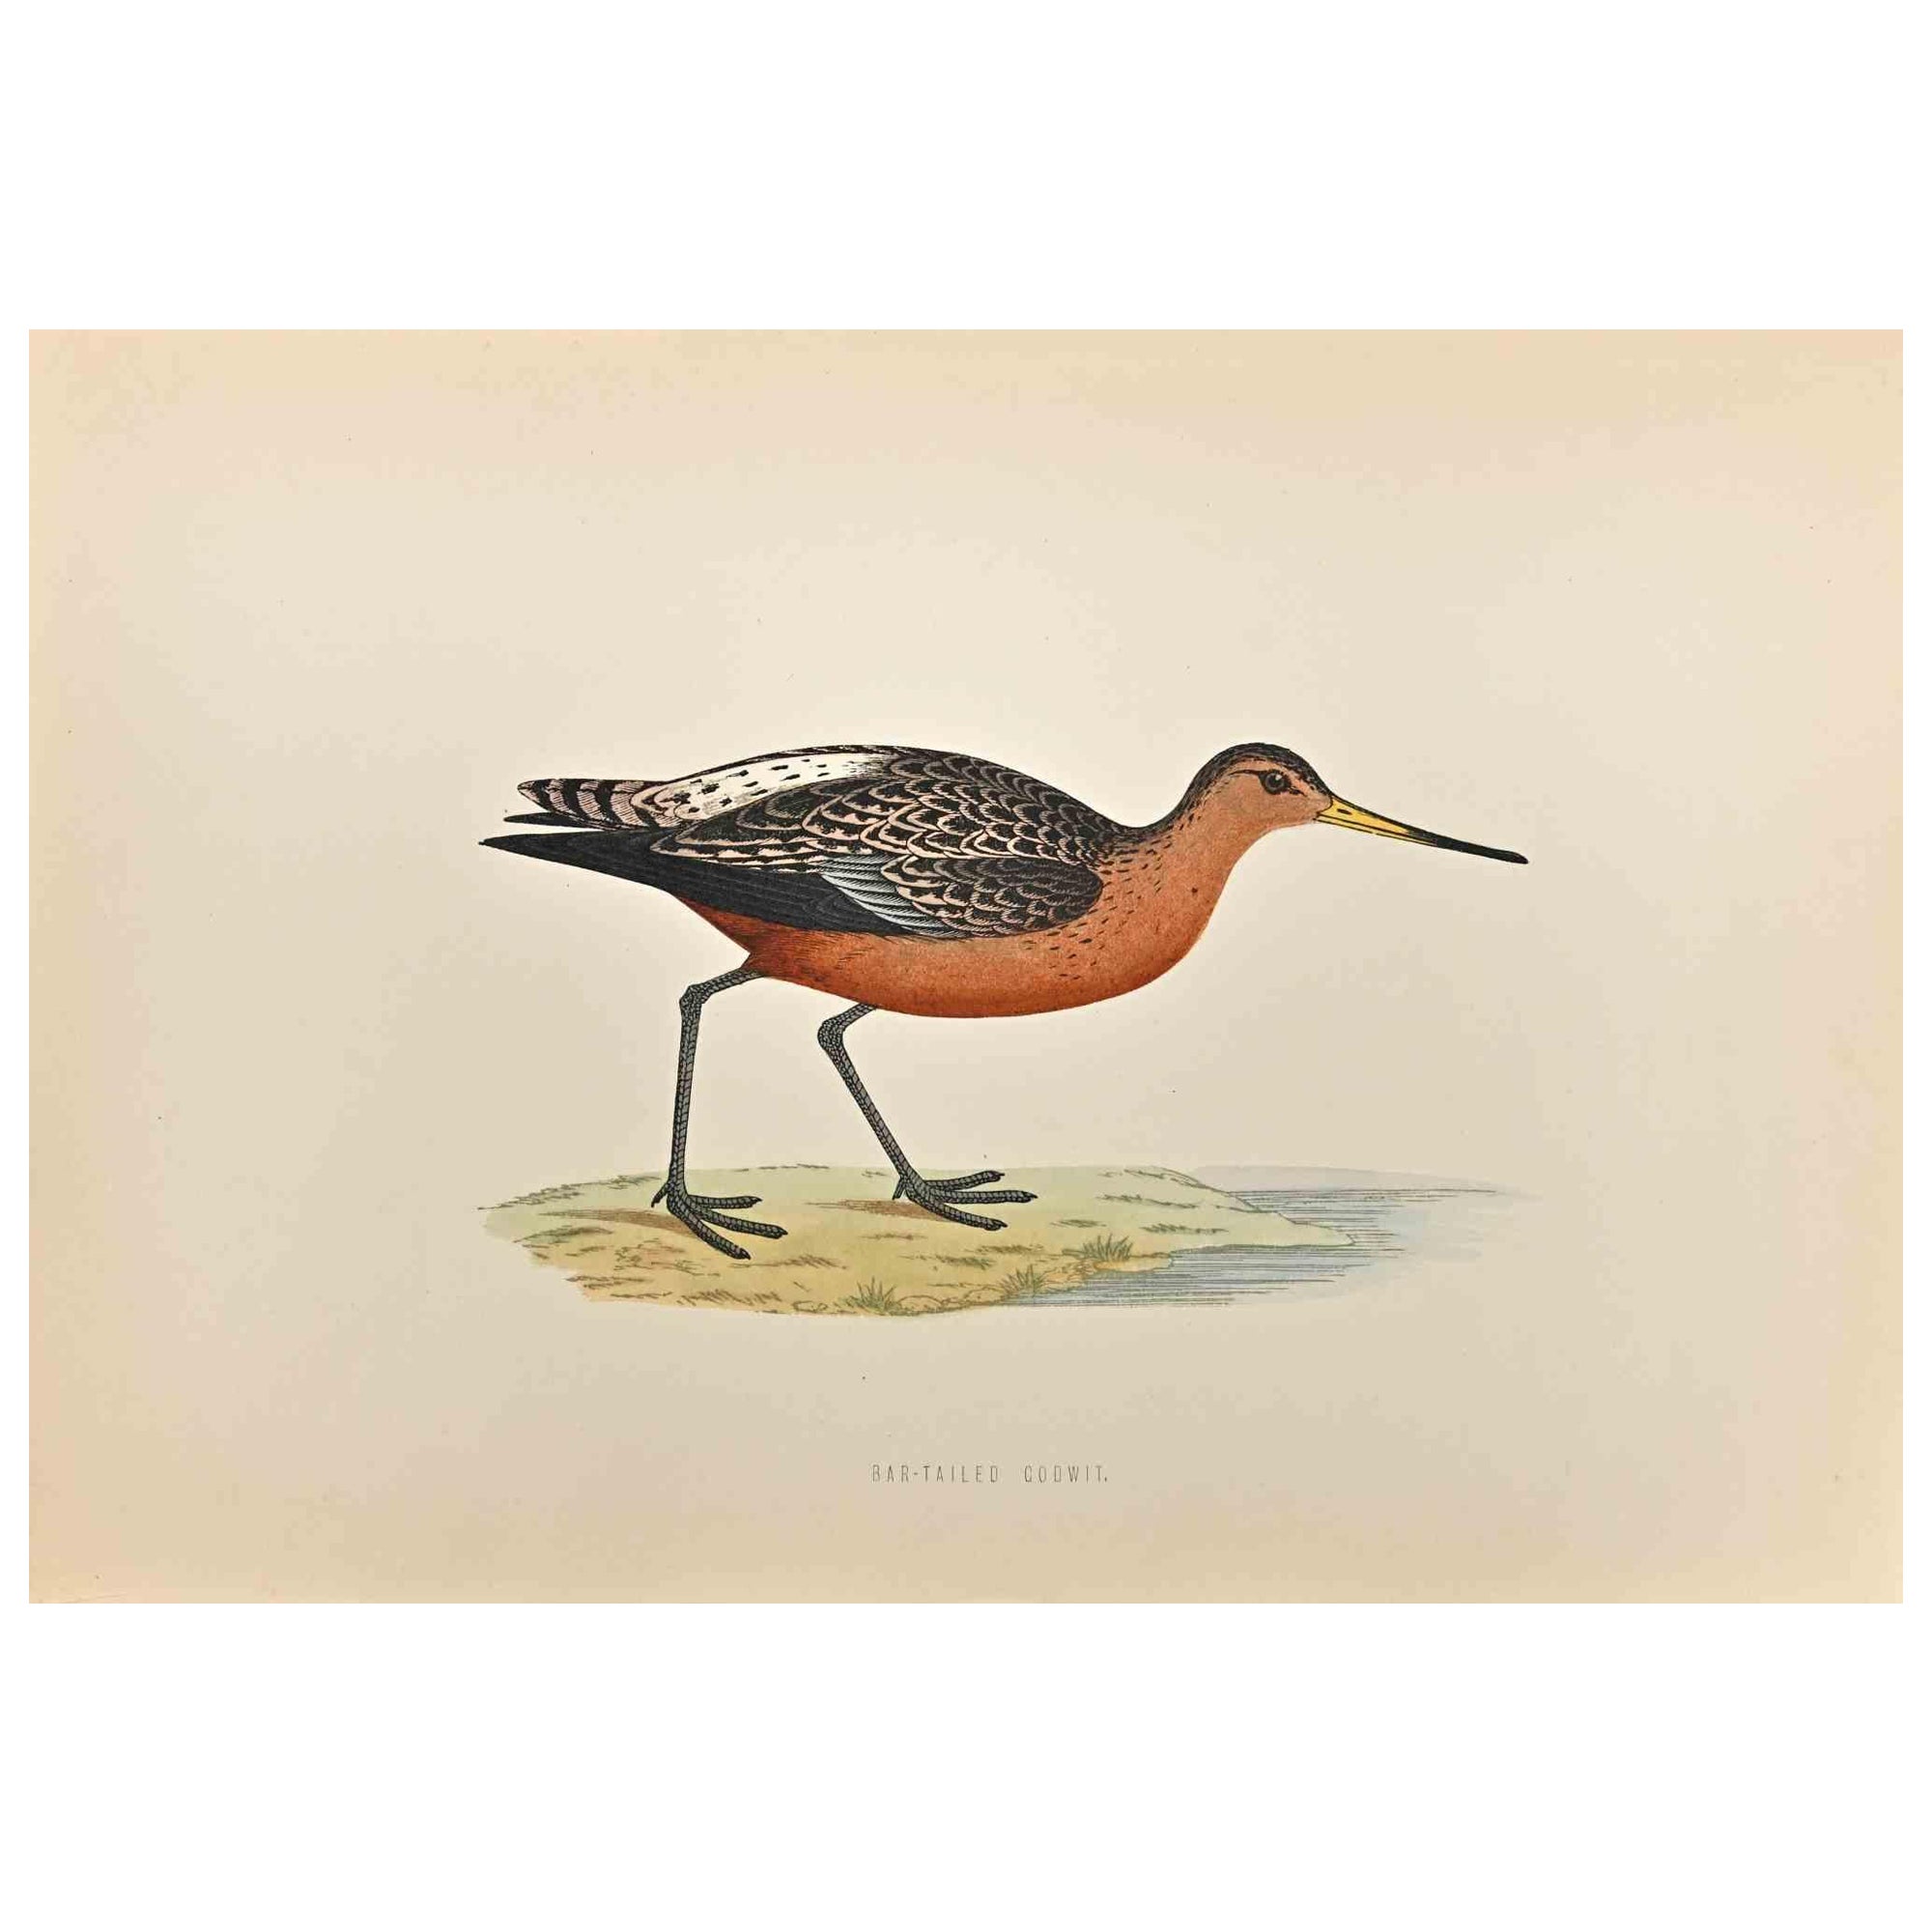 Bar-tailed Godwit is a modern artwork realized in 1870 by the British artist Alexander Francis Lydon (1836-1917).

Woodcut print on ivory-colored paper.

Hand-colored, published by London, Bell & Sons, 1870.  

The name of the bird is printed on the